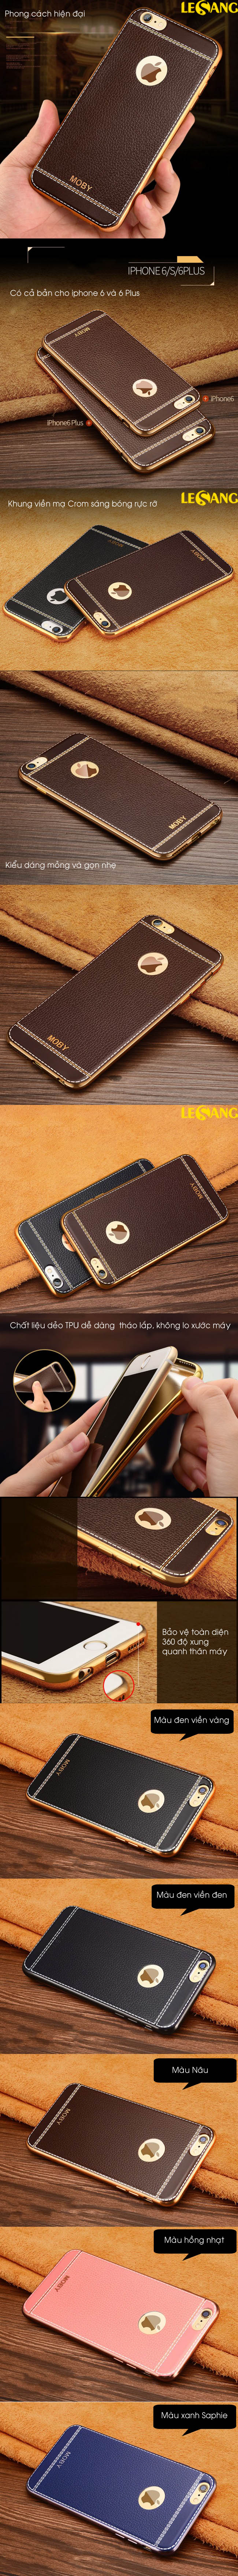 Ốp lưng iphone 6/6S Moby Leather Case 33